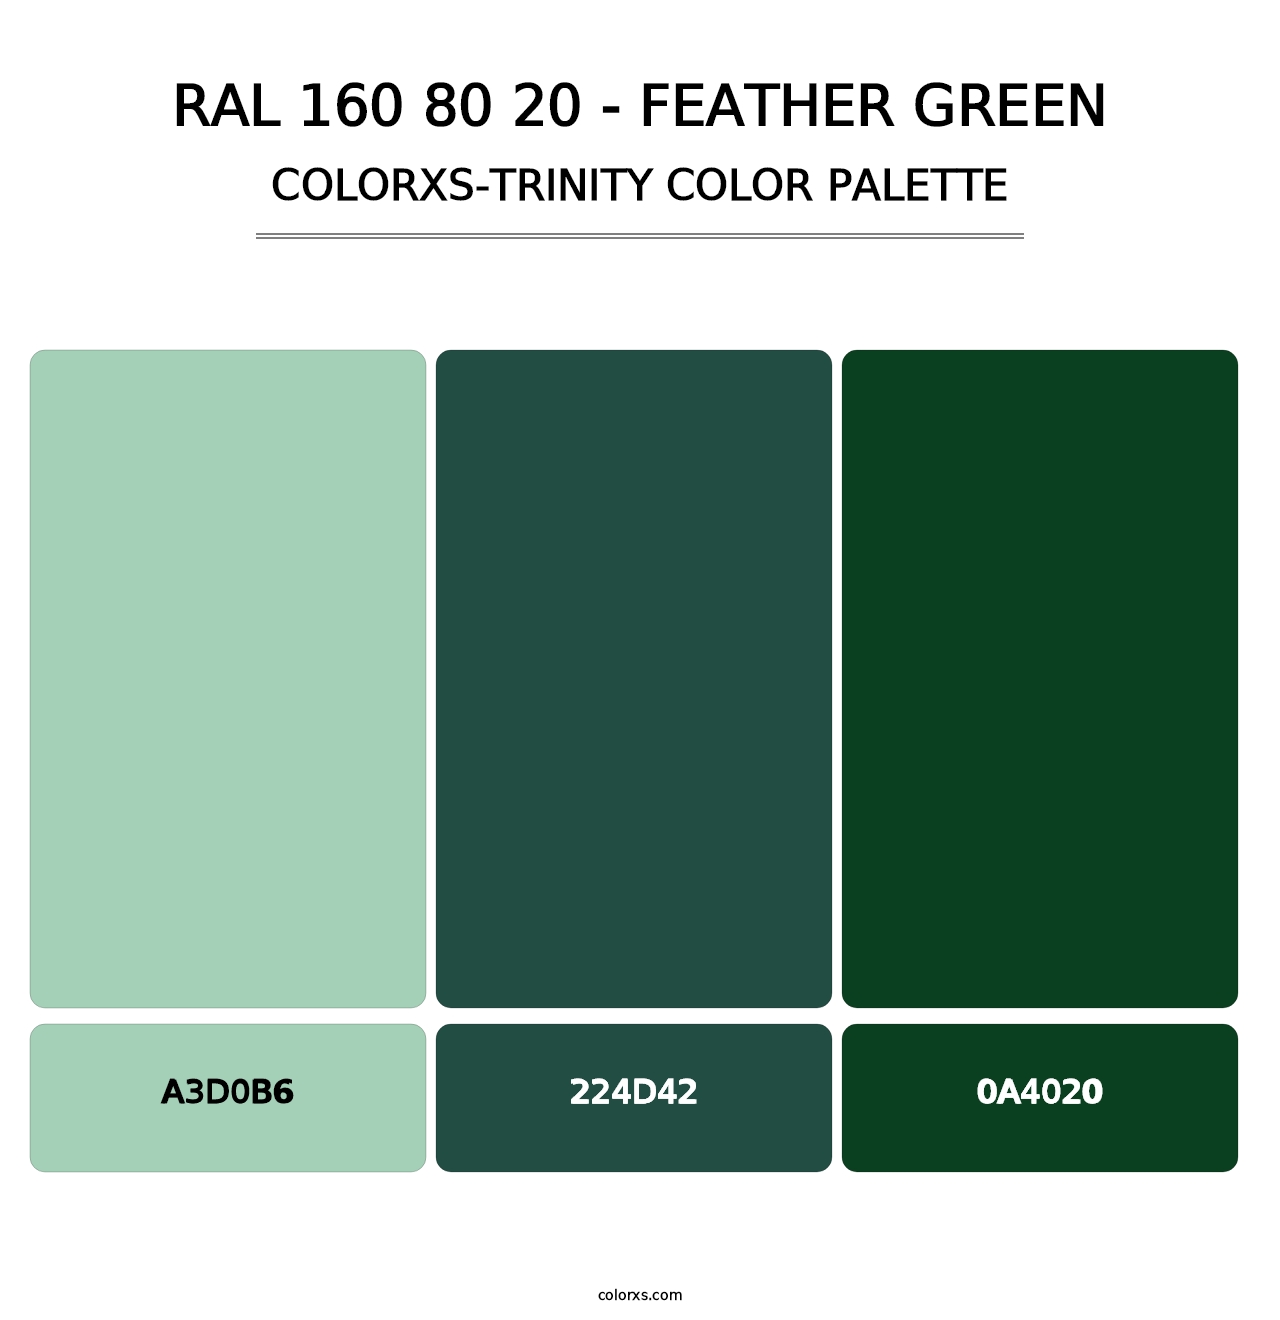 RAL 160 80 20 - Feather Green - Colorxs Trinity Palette